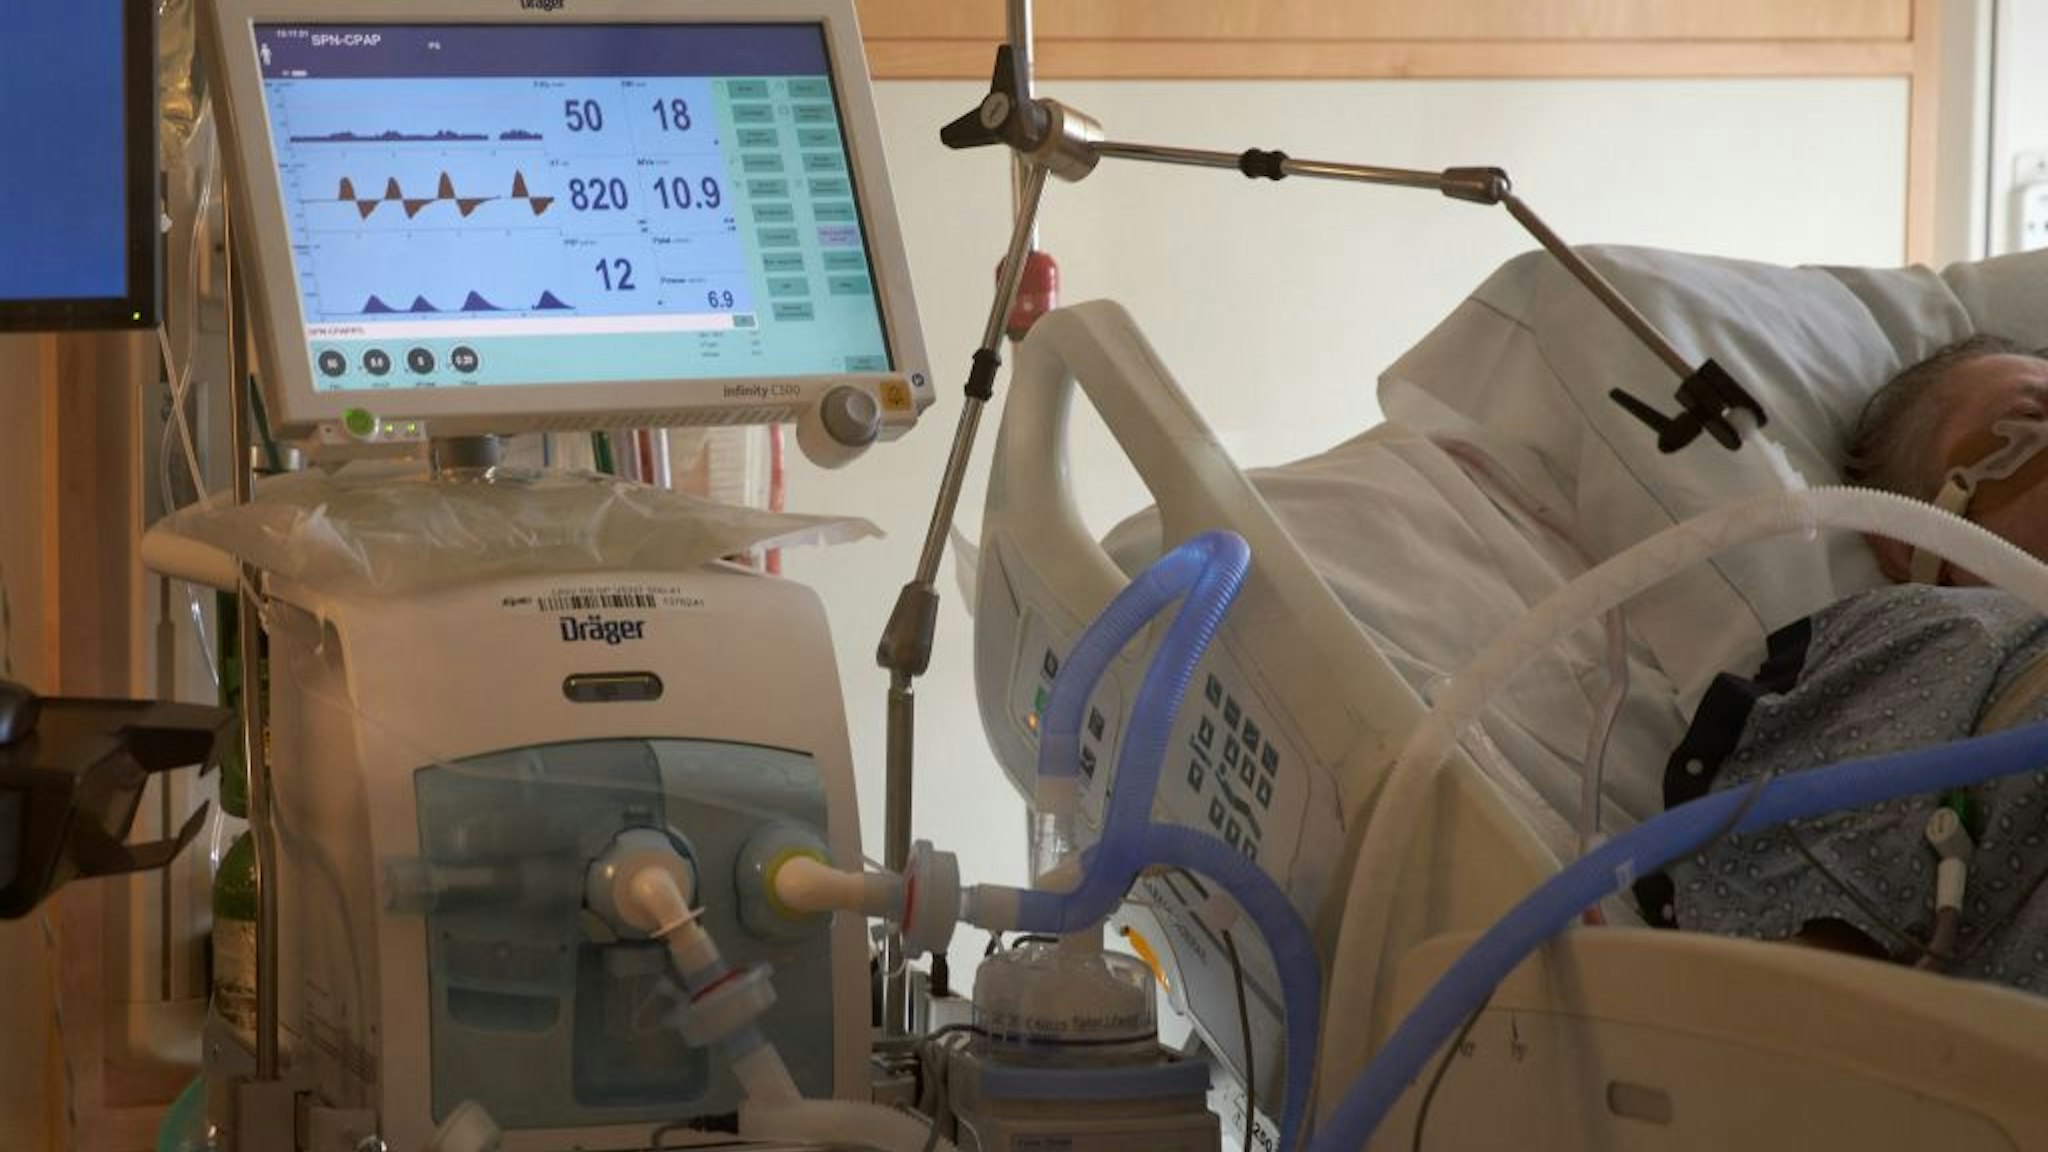 In this file photo taken on December 4, 2020, a Covid-19 positive patient is seen on a ventilator at UMass Memorial Hospital in Worcester, Massachusetts.